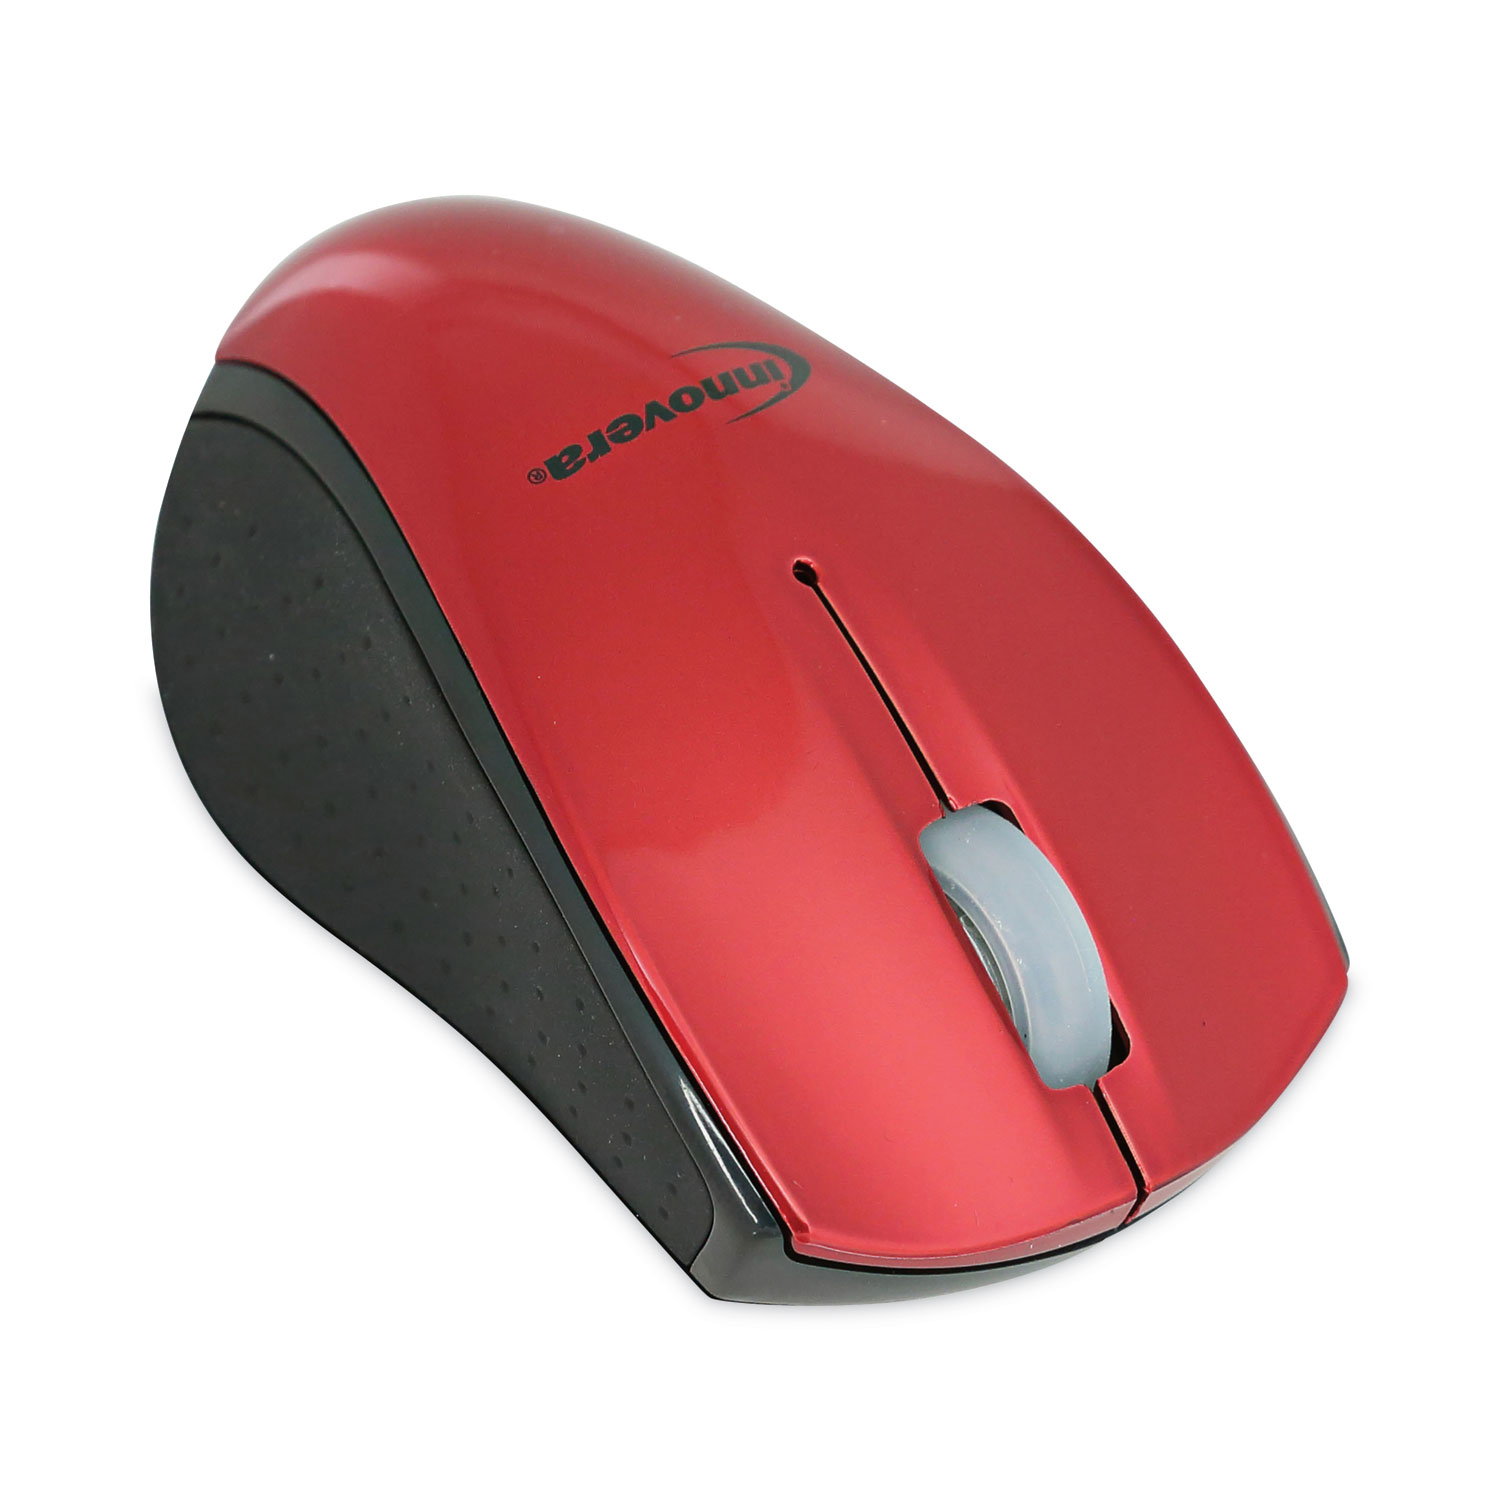 Wireless Optical Mouse Computer Electronics 